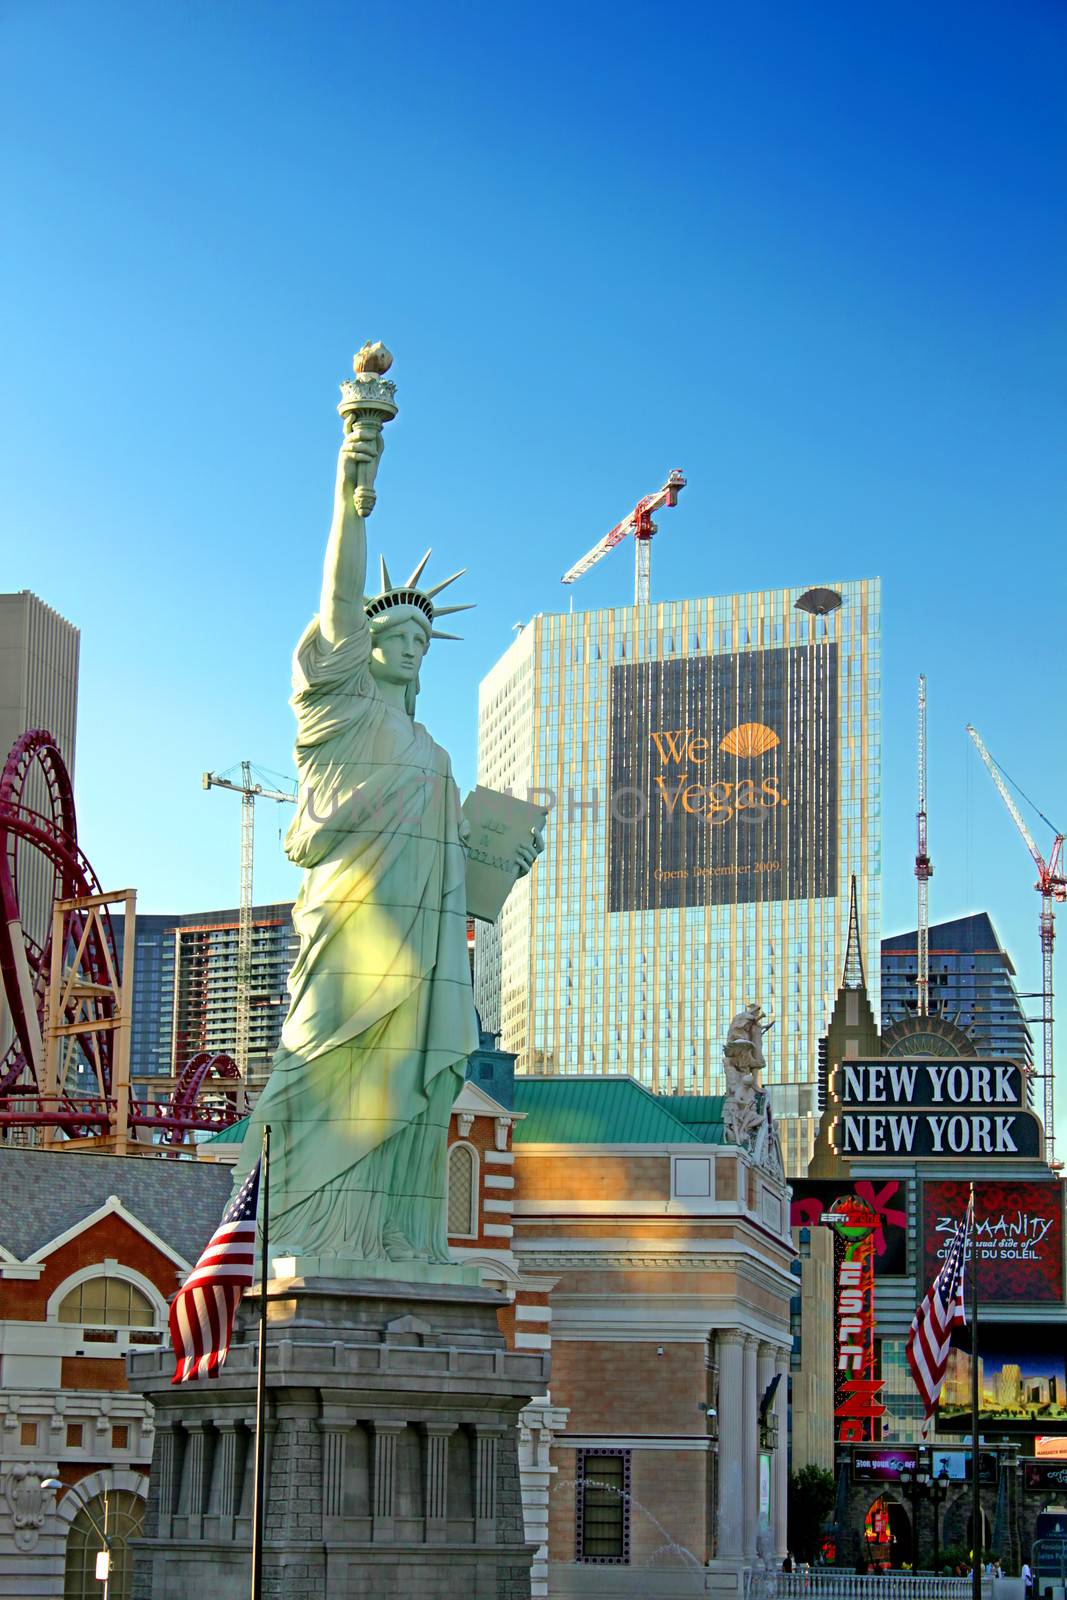 Las Vegas, USA - August 19, 2009: The New York New York Hotel and Casino in Las Vegas on Tropicana Avenue and Las Vegas Boulevard features a replica of the Statue of Liberty.  The architecture of the resort and casino is made to look like the skyline of New York.